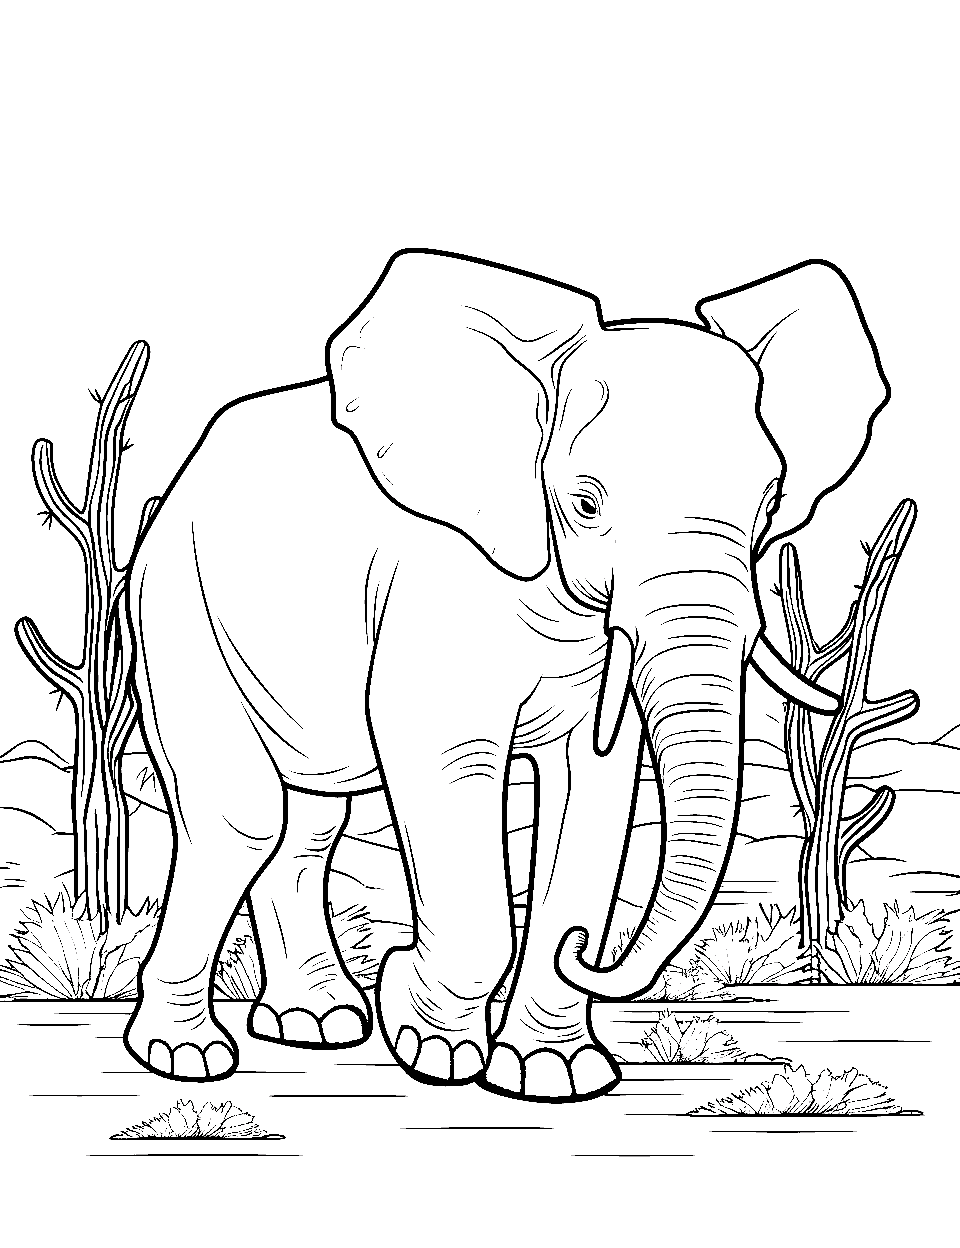 Desert Traveler Elephant Coloring Page - An elephant walking with cacti in the background.